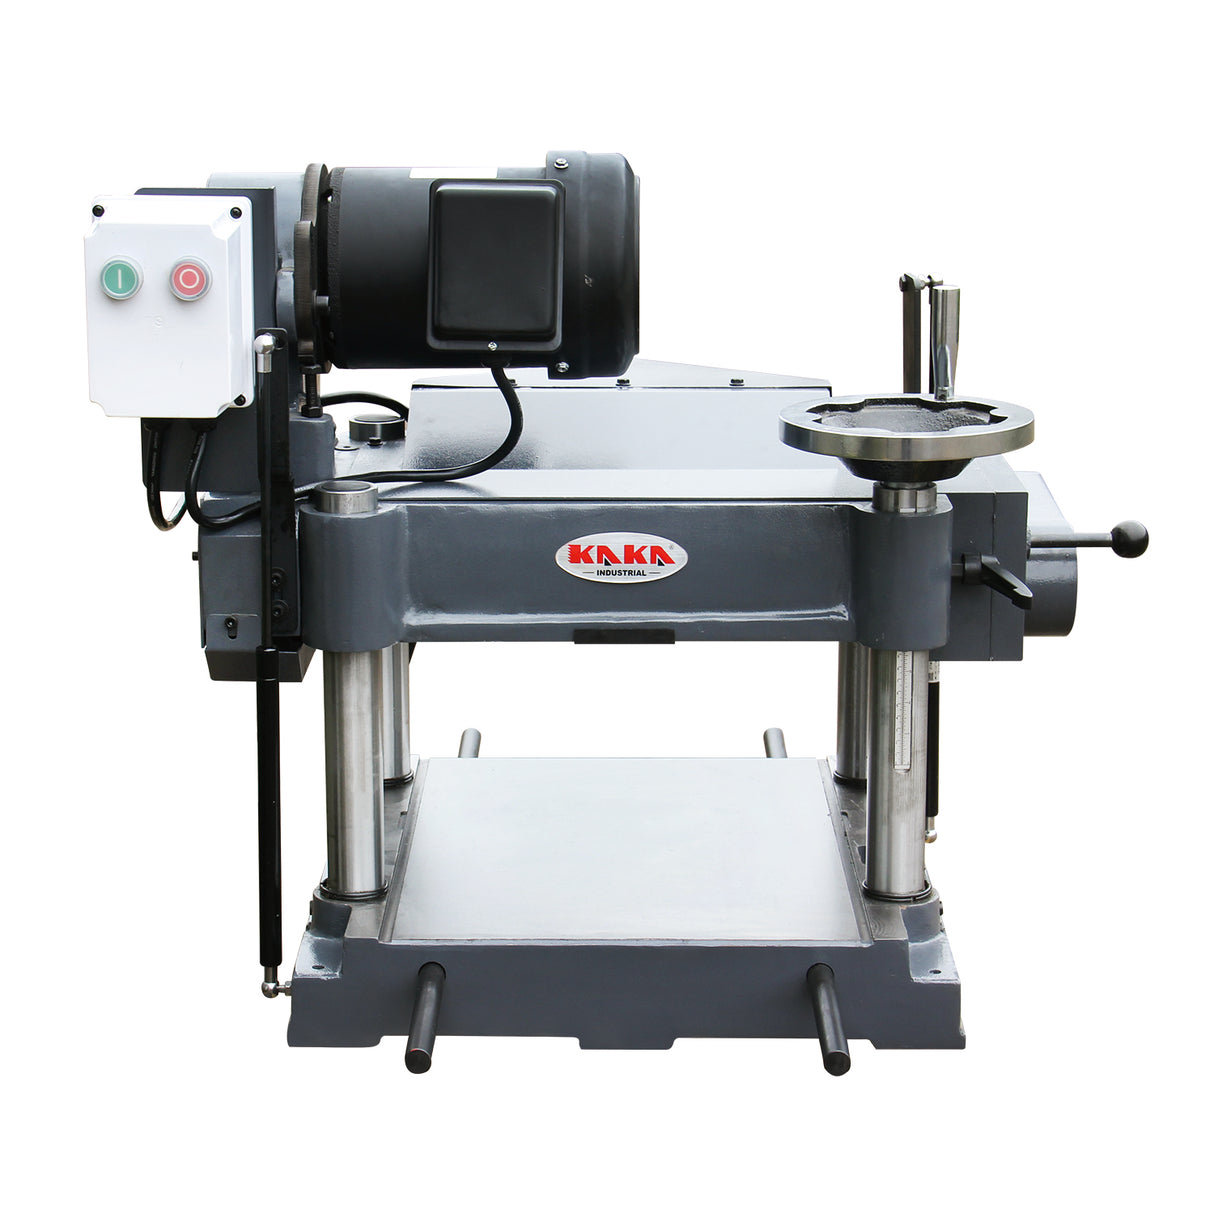 Kang Industrial WDP-4215B, Bench Top 380mm Thicknesser with Helical Spiral Cutterhead, 240V Motor